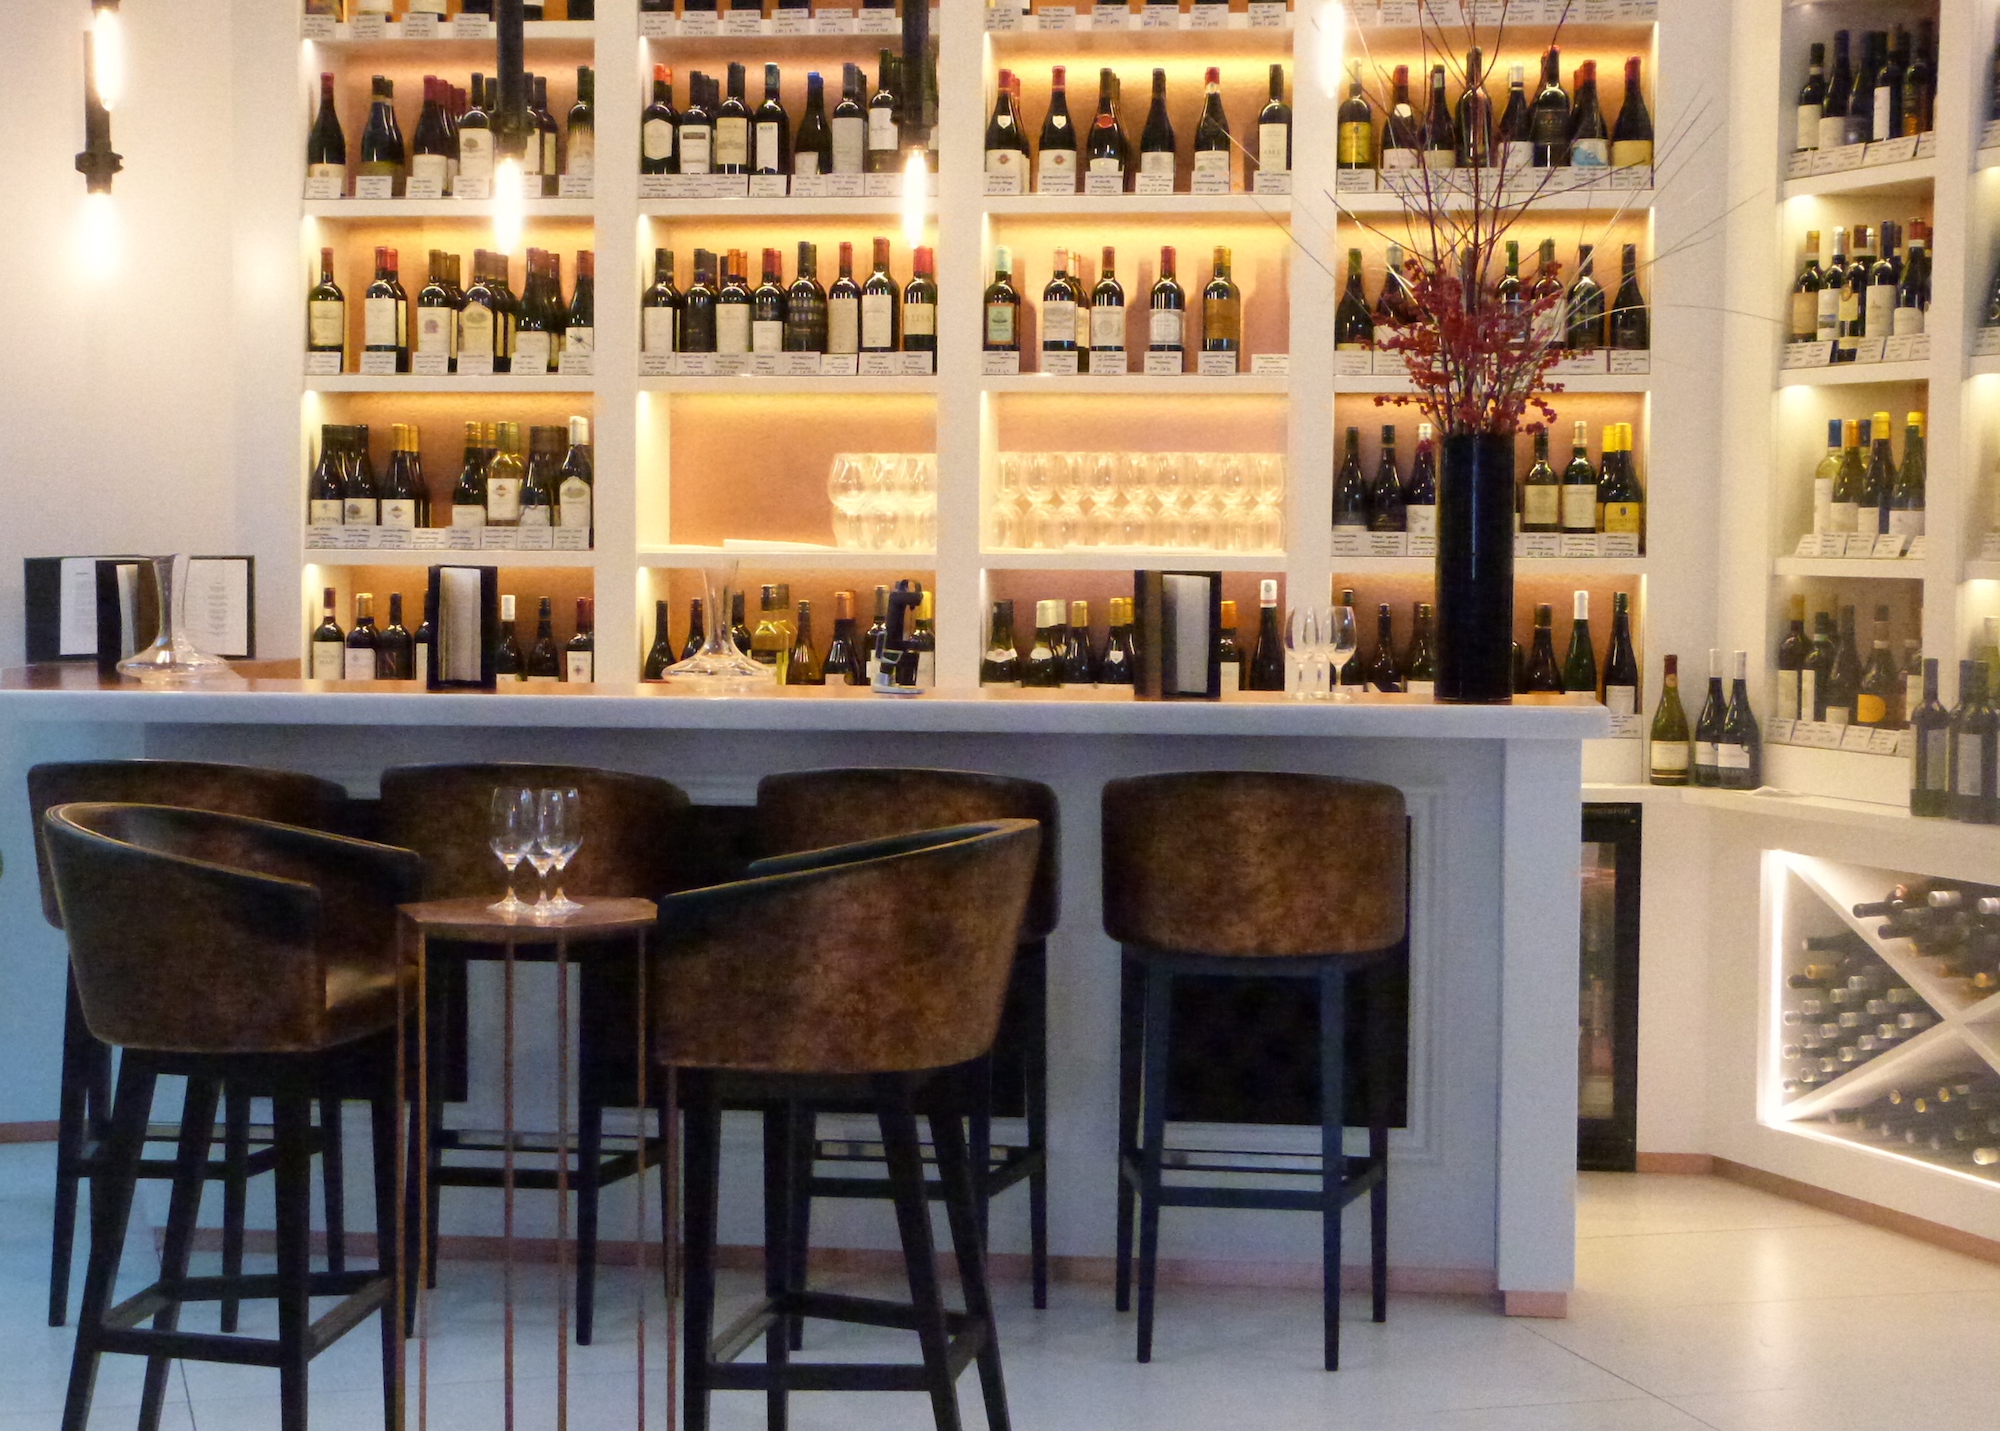 M Wine Store Opens their wine bar in Victoria